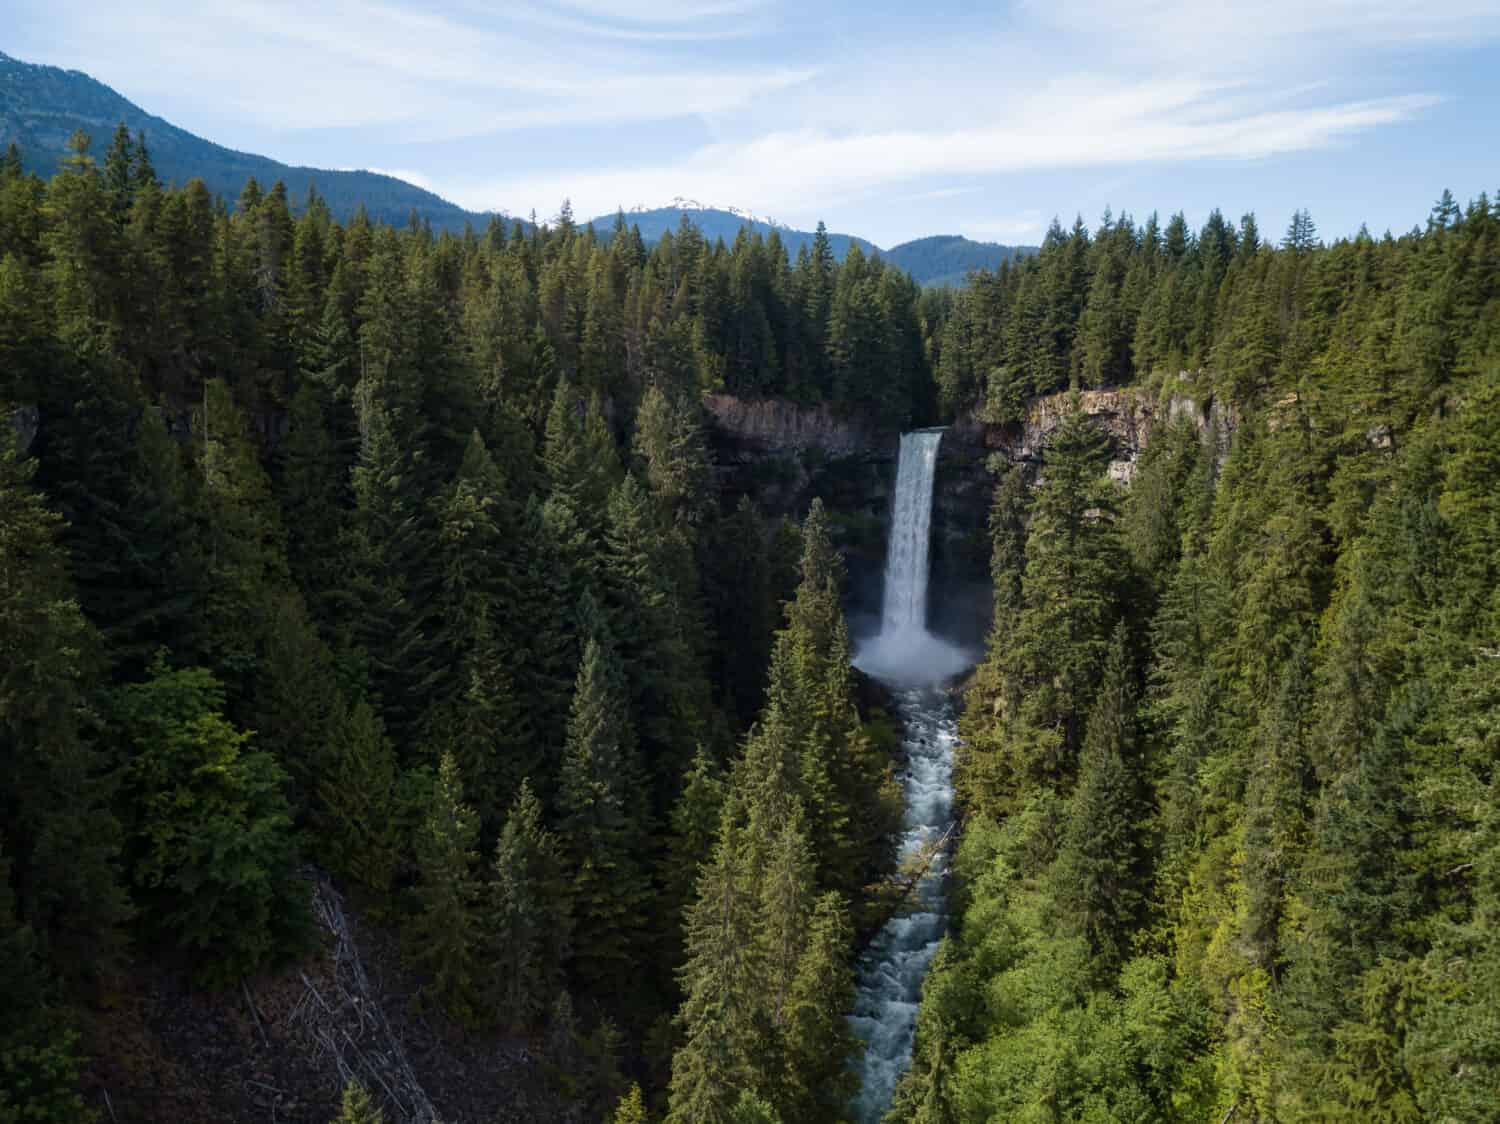 Aerial view of a beautiful waterfall in a canyon (Brandywine Falls). Taken near Whistler and Squamish, North of Vancouver, BC, Canada.